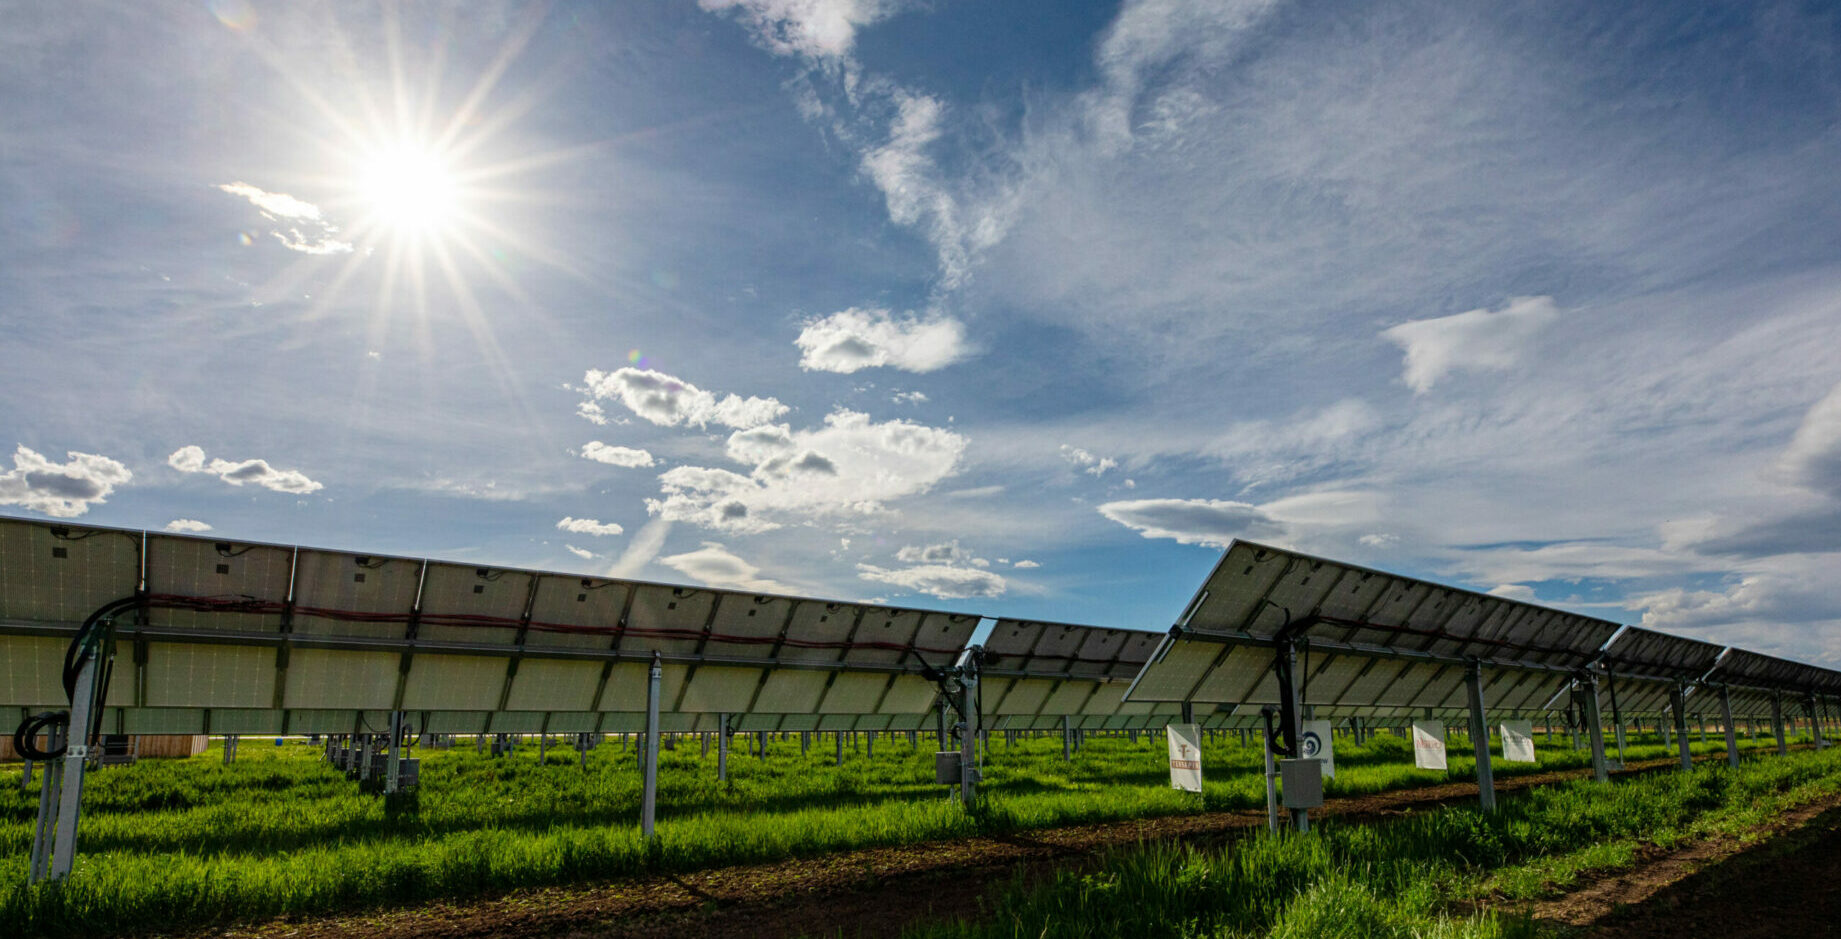 The sun shines on the solar array at Jack’s Solar Garden in Longmont, Colo.